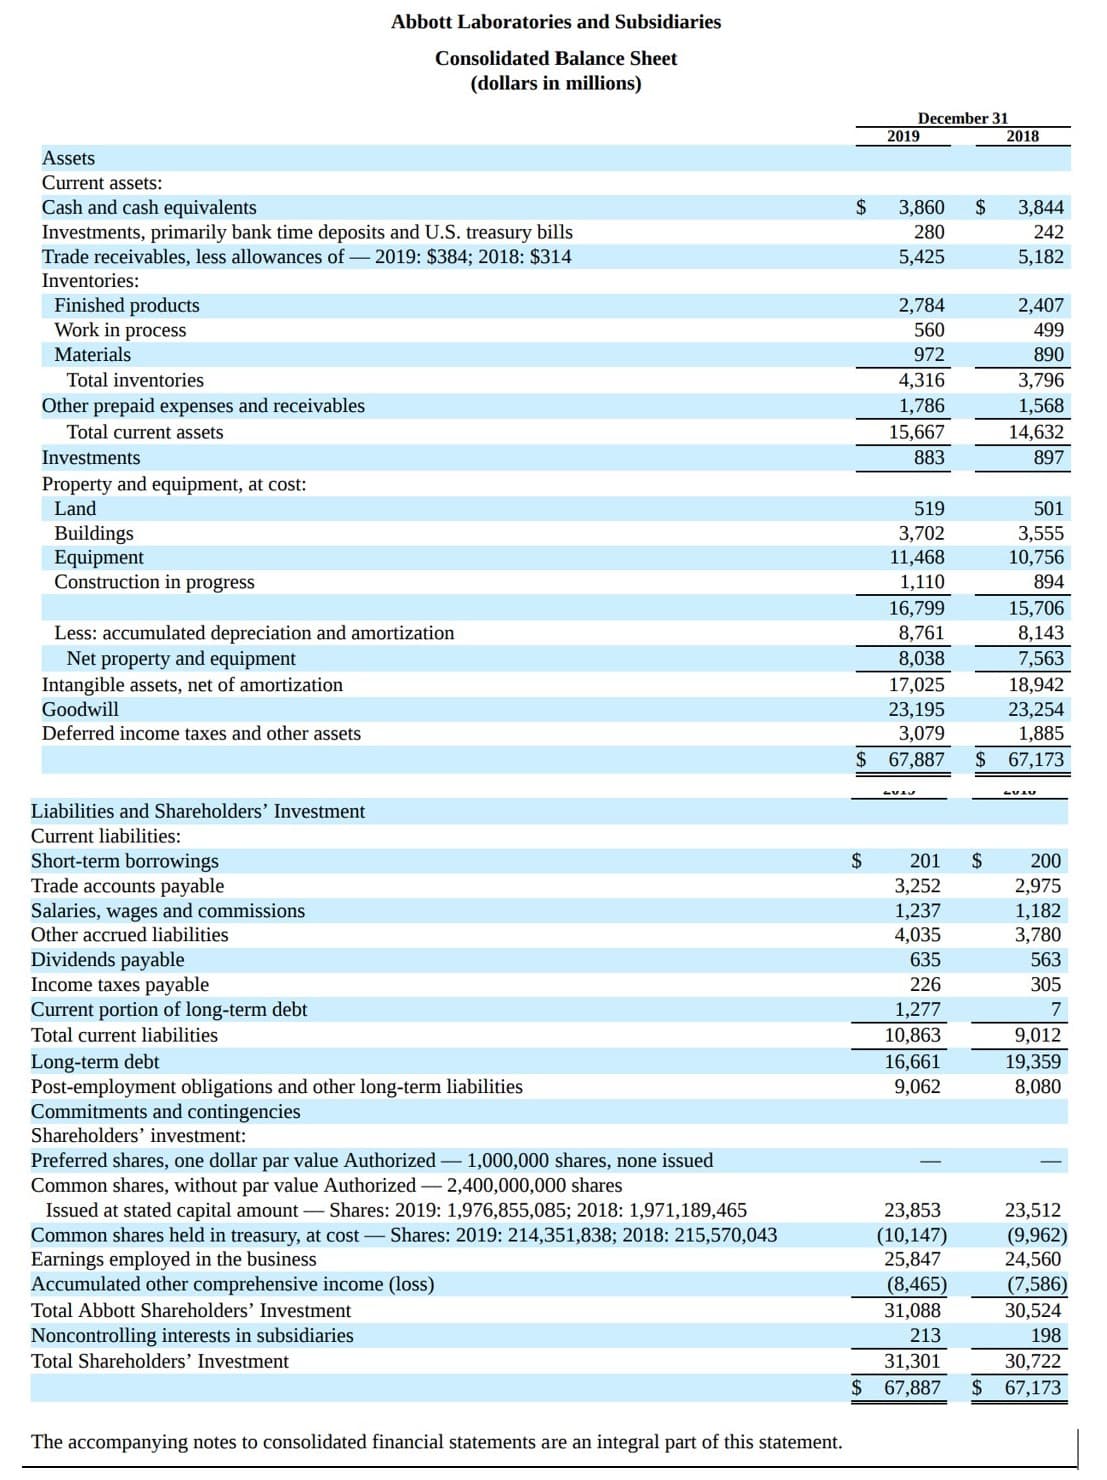 Abbott Laboratories and Subsidiaries
Consolidated Balance Sheet
(dollars in millions)
December 31
2019
2018
Assets
Current assets:
Cash and cash equivalents
Investments, primarily bank time deposits and U.S. treasury bills
Trade receivables, less allowances of-2019: $384; 2018: $314
$
3,860
2$
3,844
280
242
5,425
5,182
Inventories:
Finished products
Work in process
2,784
2,407
560
499
Materials
972
890
Total inventories
4,316
3,796
Other prepaid expenses and receivables
Total current assets
1,786
1,568
15,667
14,632
Investments
883
897
Property and equipment, at cost:
Land
519
501
Buildings
Equipment
Construction in progress
3,555
10,756
3,702
11,468
1,110
894
15,706
8,143
16,799
Less: accumulated depreciation and amortization
Net property and equipment
Intangible assets, net of amortization
Goodwill
8,761
8,038
7,563
17,025
23,195
3,079
18,942
23,254
1,885
Deferred income taxes and other assets
$ 67,887
$ 67,173
Liabilities and Shareholders' Investment
Current liabilities:
Short-term borrowings
Trade accounts payable
Salaries, wages and commissions
Other accrued liabilities
2$
201
200
3,252
1,237
4,035
2,975
1,182
3,780
Dividends payable
Income taxes payable
Current portion of long-term debt
635
563
226
305
1,277
7
Total current liabilities
10,863
9,012
Long-term debt
Post-employment obligations and other long-term liabilities
Commitments and contingencies
Shareholders' investment:
16,661
9,062
19,359
8,080
Preferred shares, one dollar par value Authorized – 1,000,000 shares, none issued
Common shares, without par value Authorized – 2,400,000,000 shares
Issued at stated capital amount – Shares: 2019: 1,976,855,085; 2018: 1,971,189,465
Common shares held in treasury, at cost -Shares: 2019: 214,351,838; 2018: 215,570,043
Earnings employed in the business
Accumulated other comprehensive income (loss)
23,853
23,512
(10,147)
25,847
(9,962)
24,560
(7,586)
(8,465)
Total Abbott Shareholders' Investment
31,088
30,524
Noncontrolling interests in subsidiaries
213
198
Total Shareholders' Investment
31,301
30,722
2$
67,887
$ 67,173
The accompanying notes to consolidated financial statements are an integral part of this statement.
